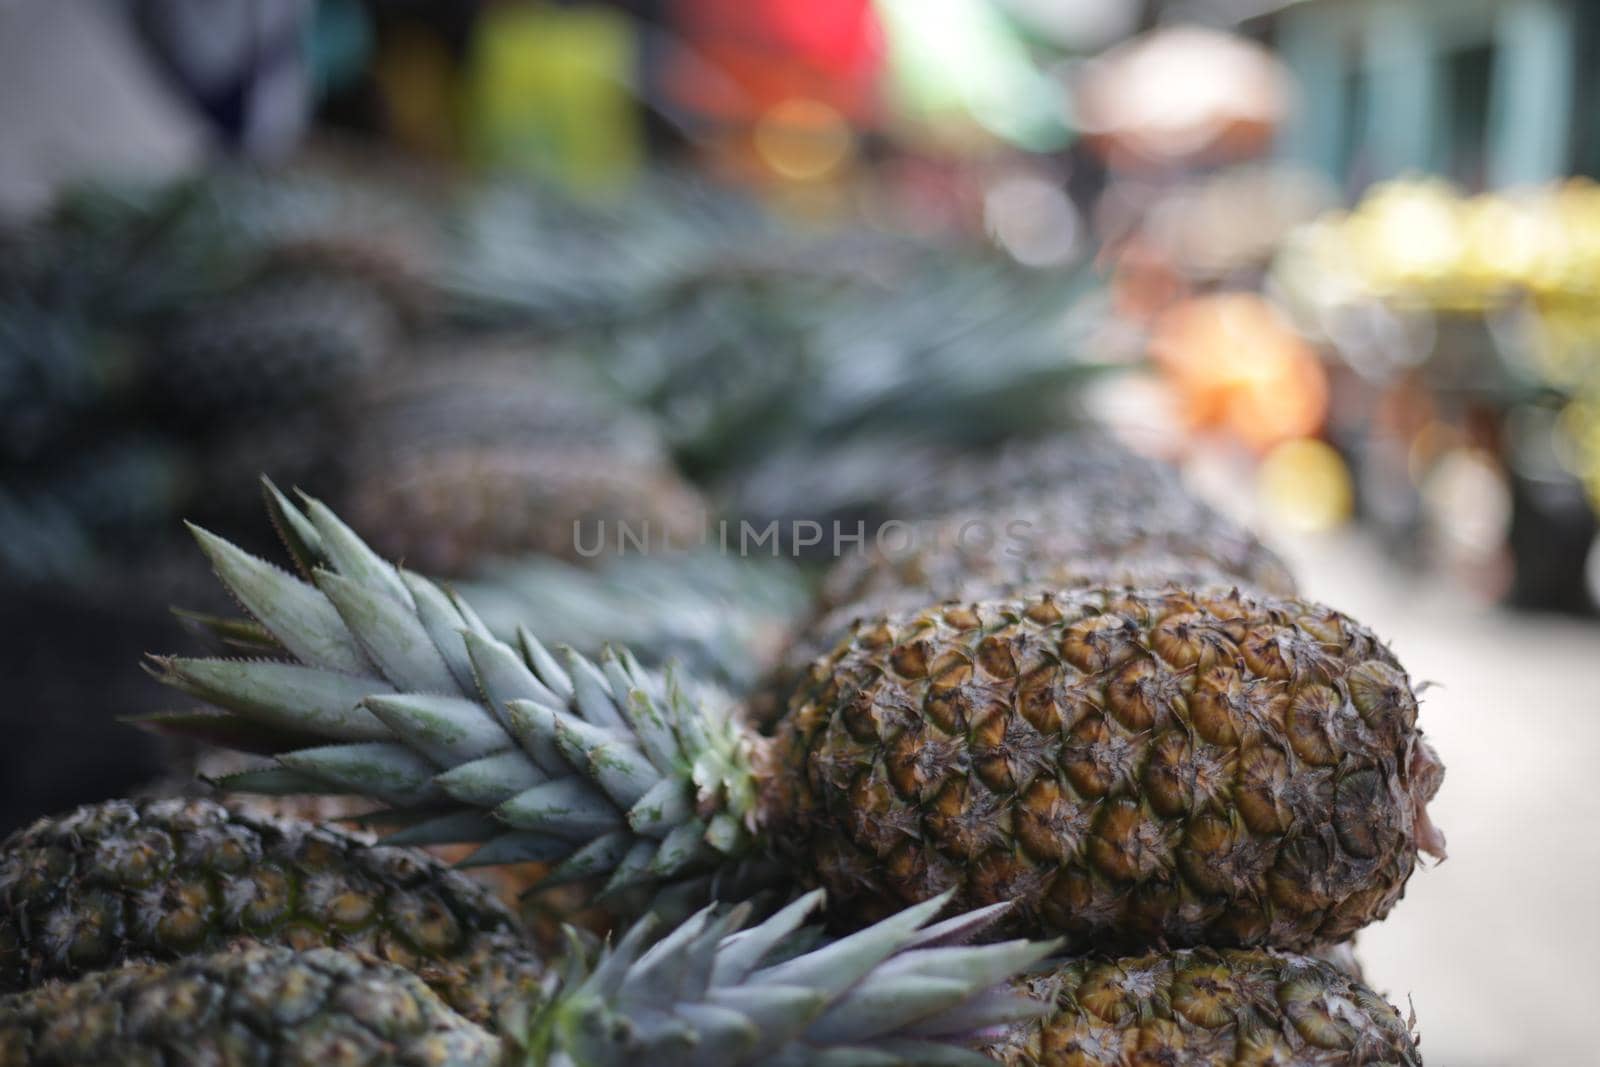 salvador, bahia / brazil - march 16, 2017: Pineapple is seen for sale at the Sao Joaquim Fair in the city of Salvador.